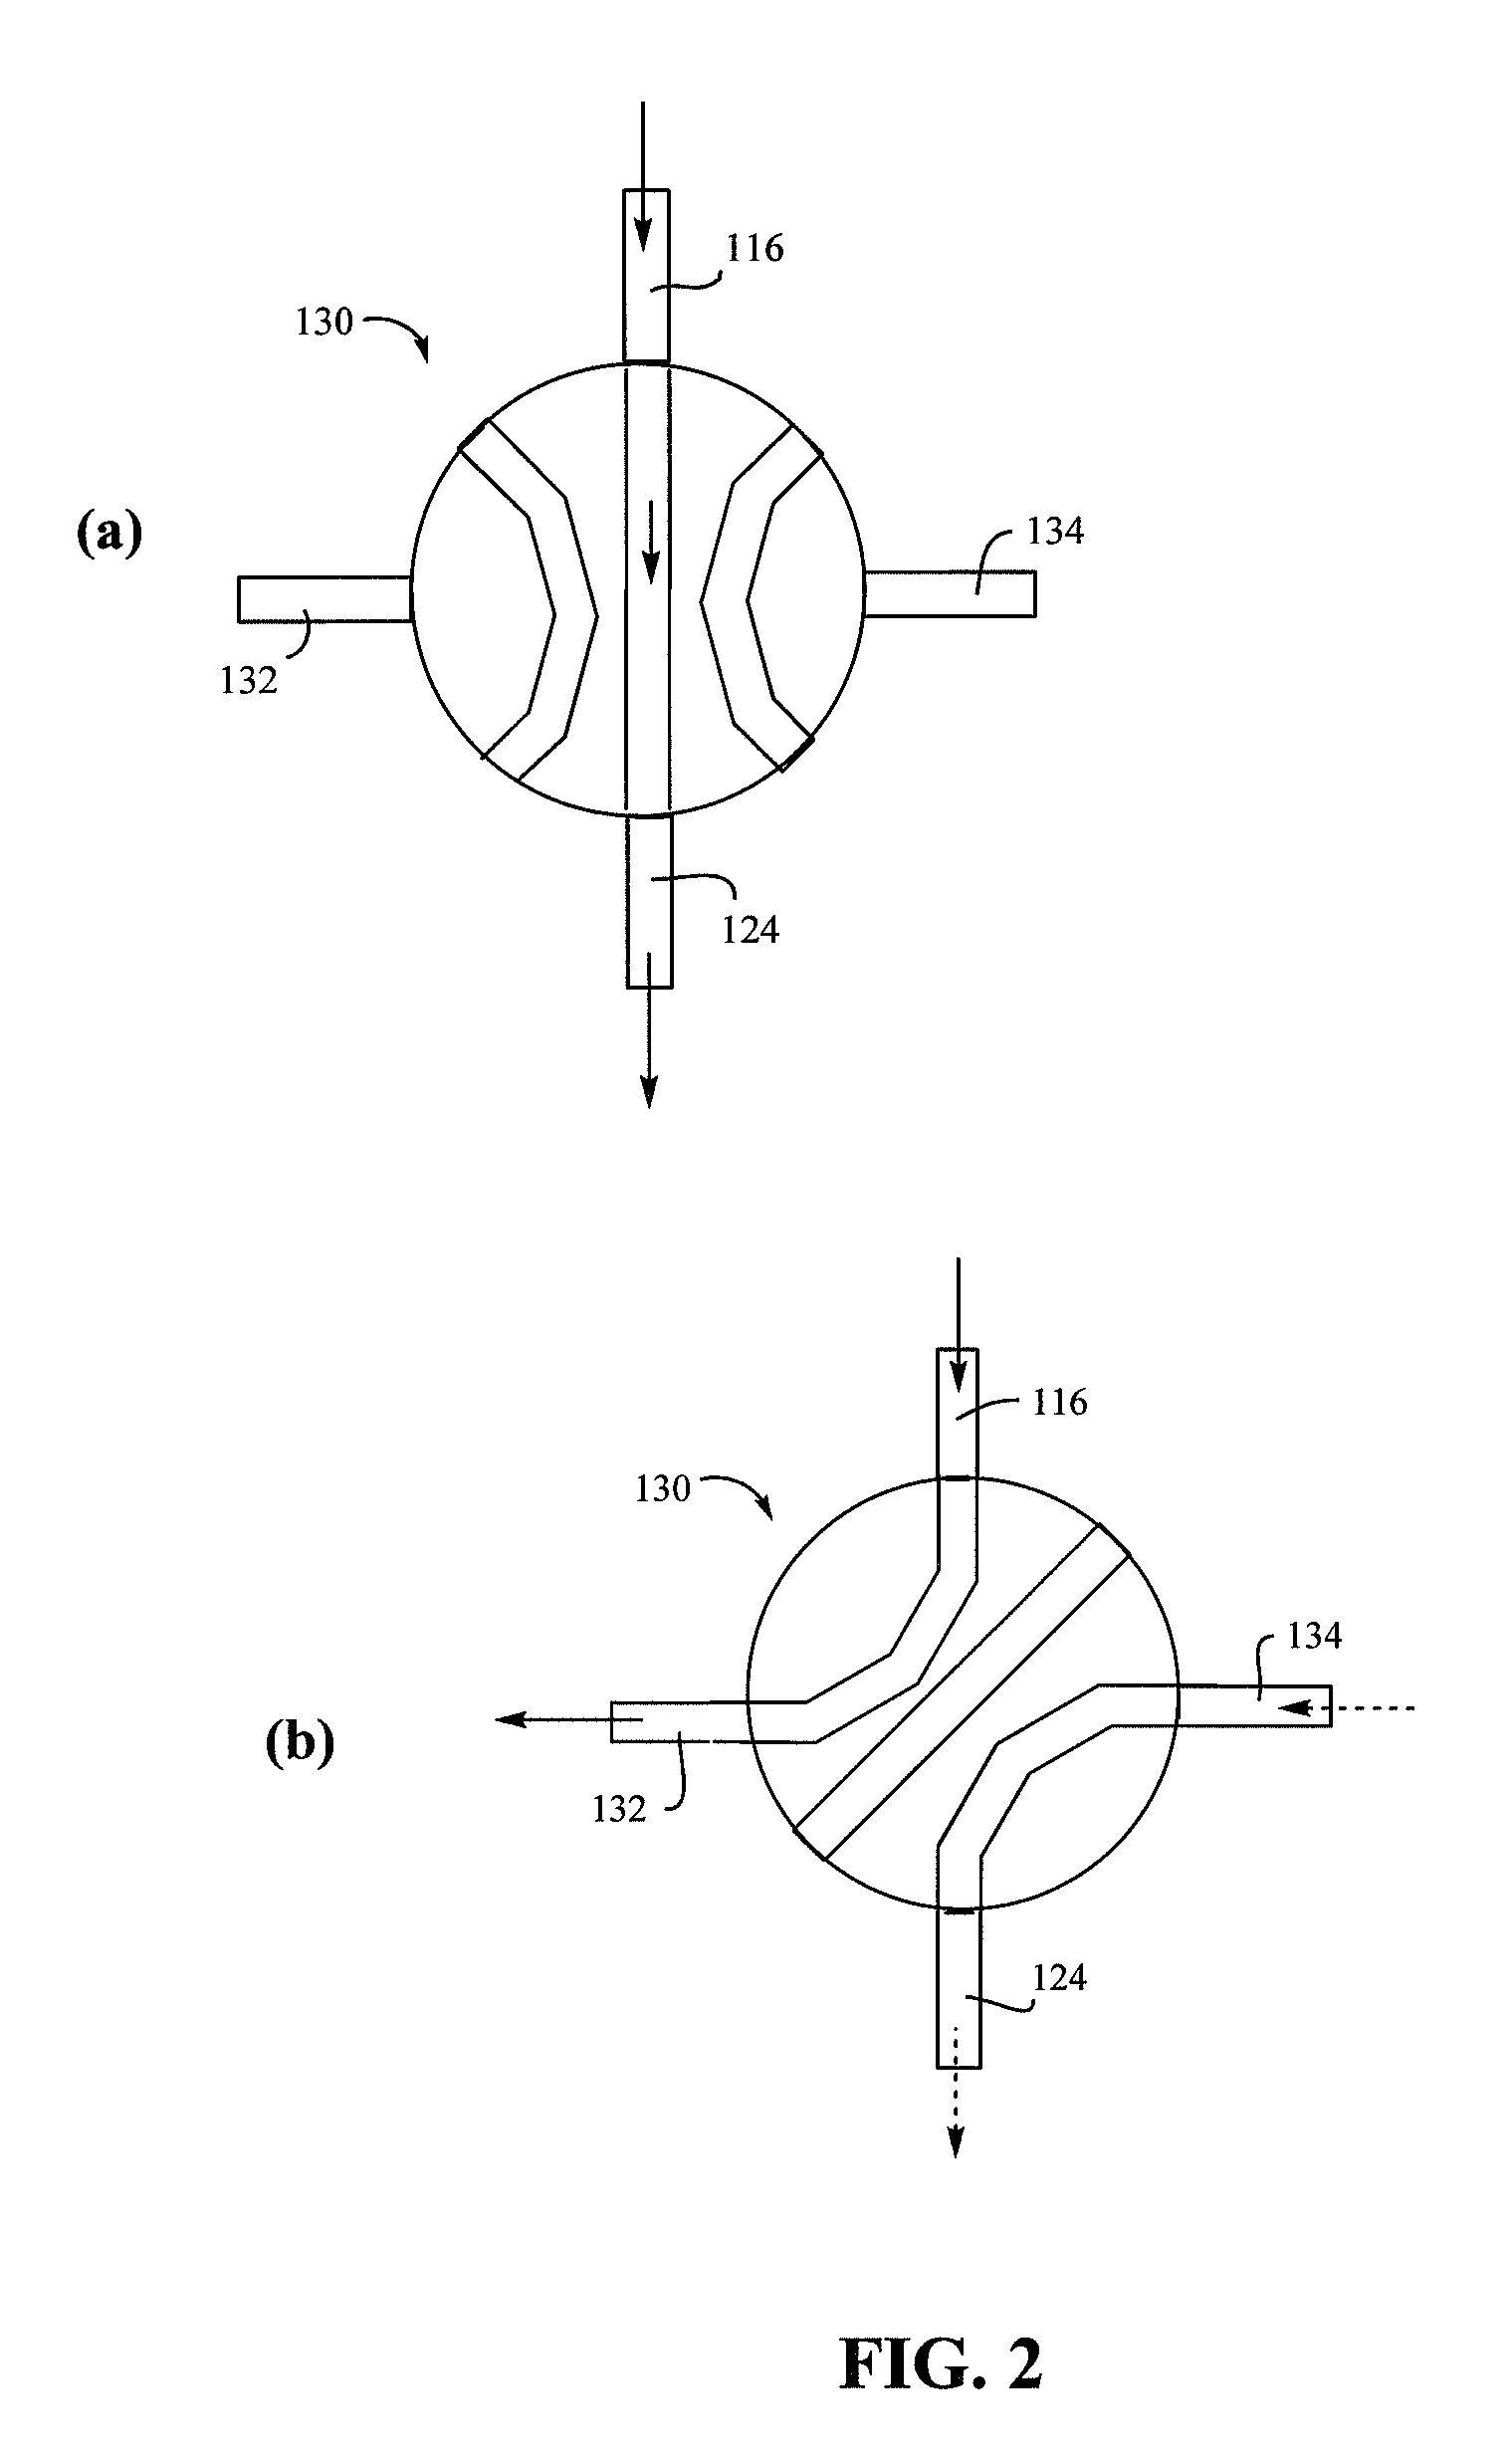 Method and apparatus for extraction of strontium from urine